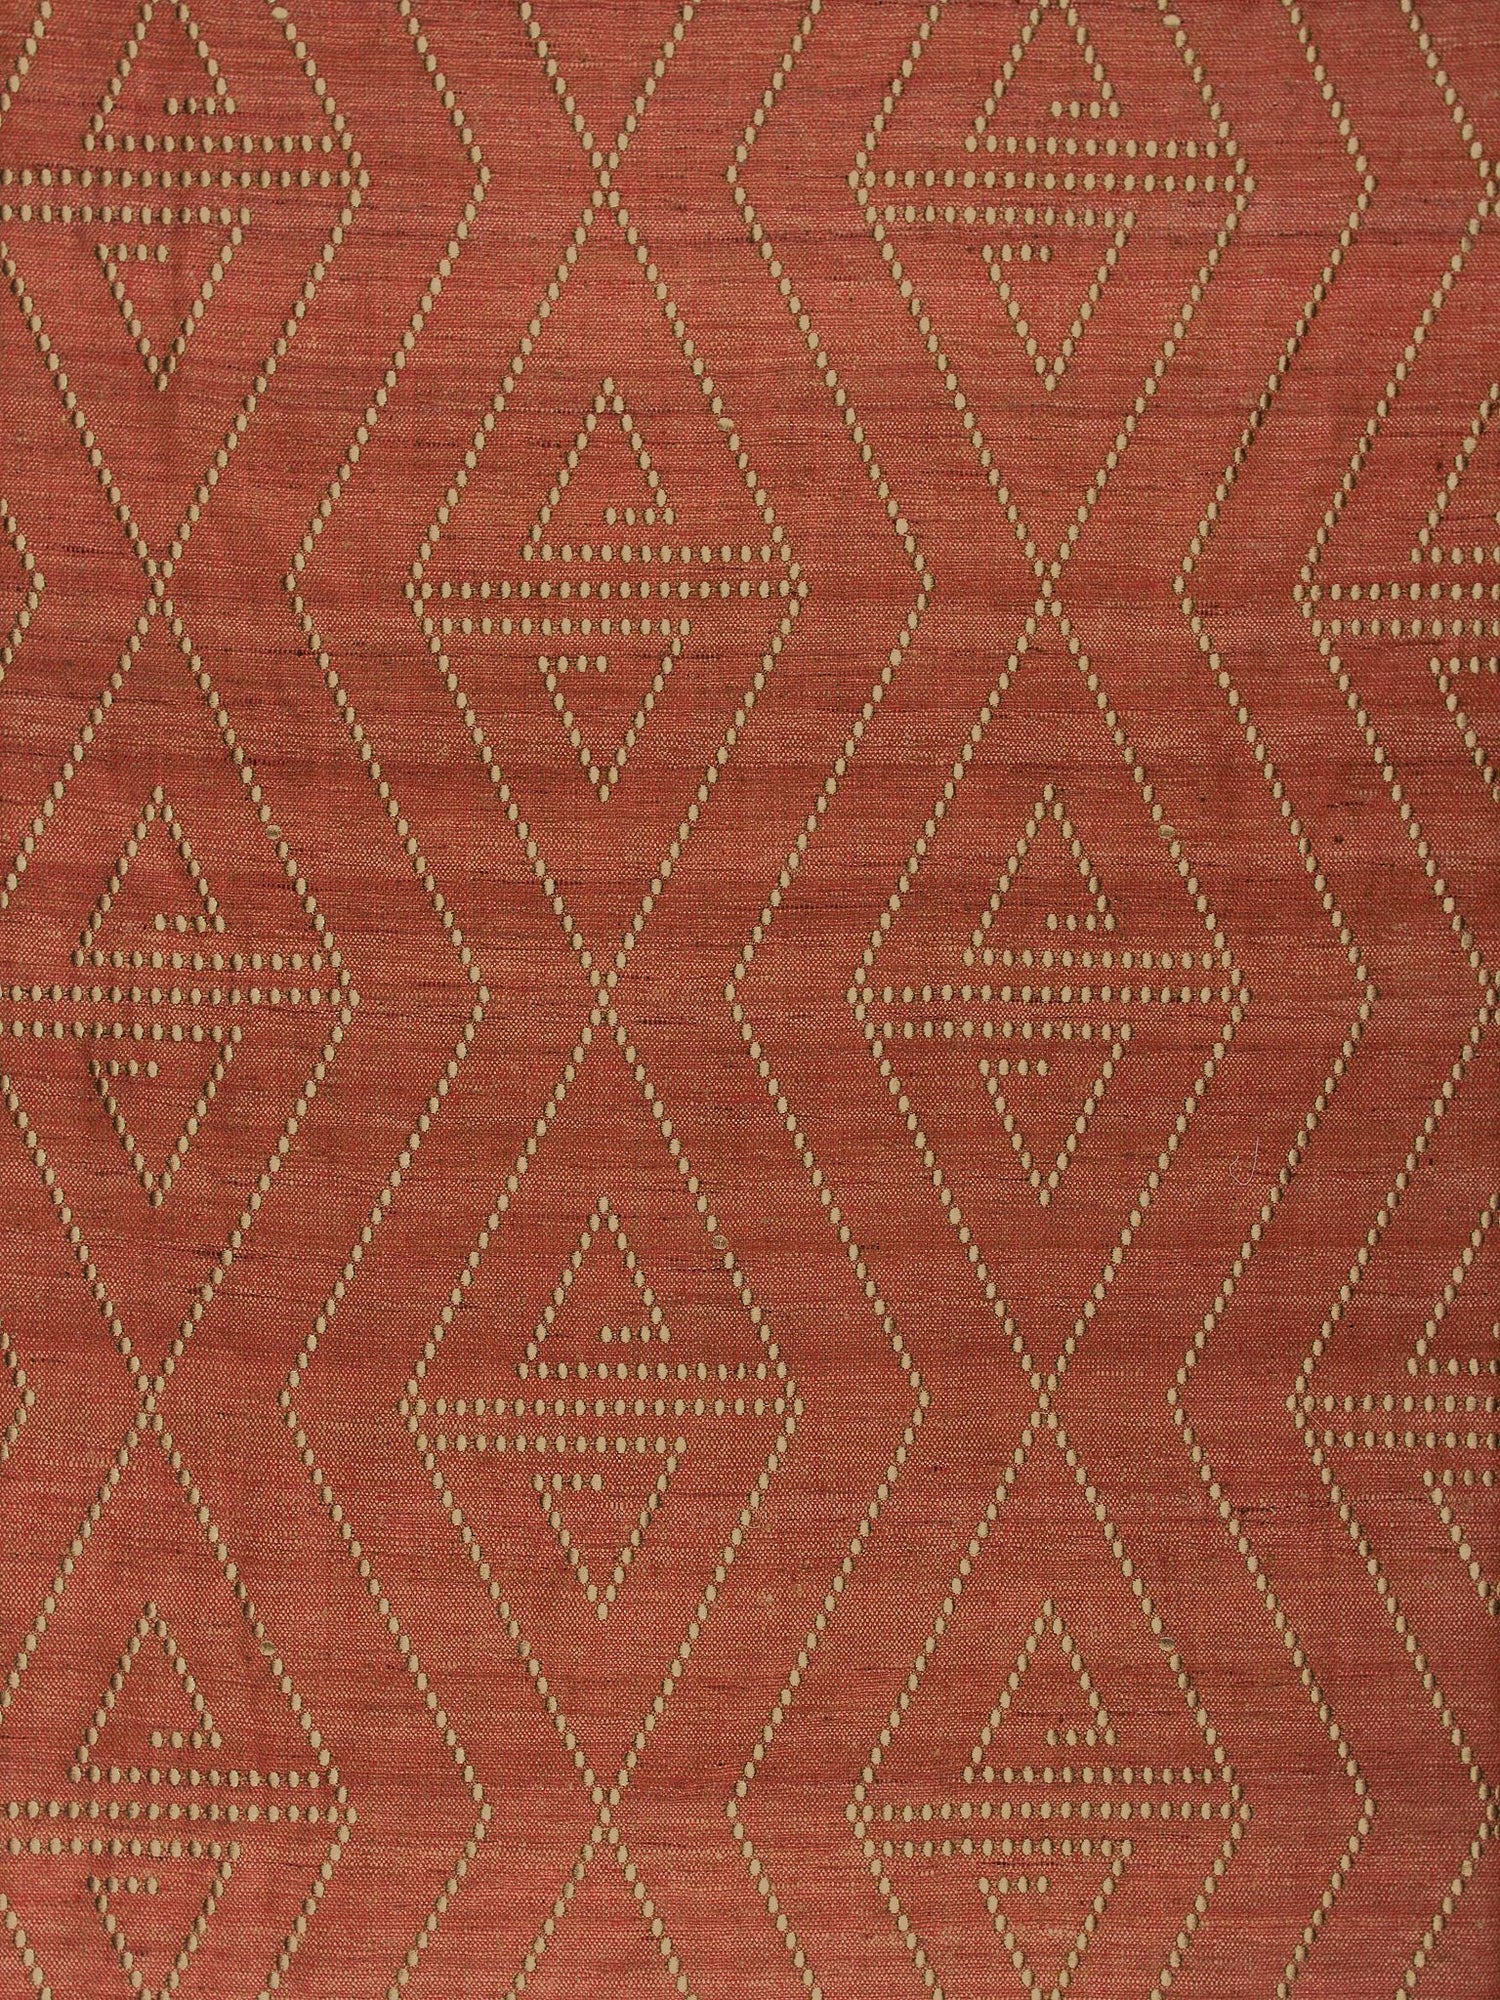 Torquay fabric in tomato color - pattern number ZS 00218068 - by Scalamandre in the Old World Weavers collection